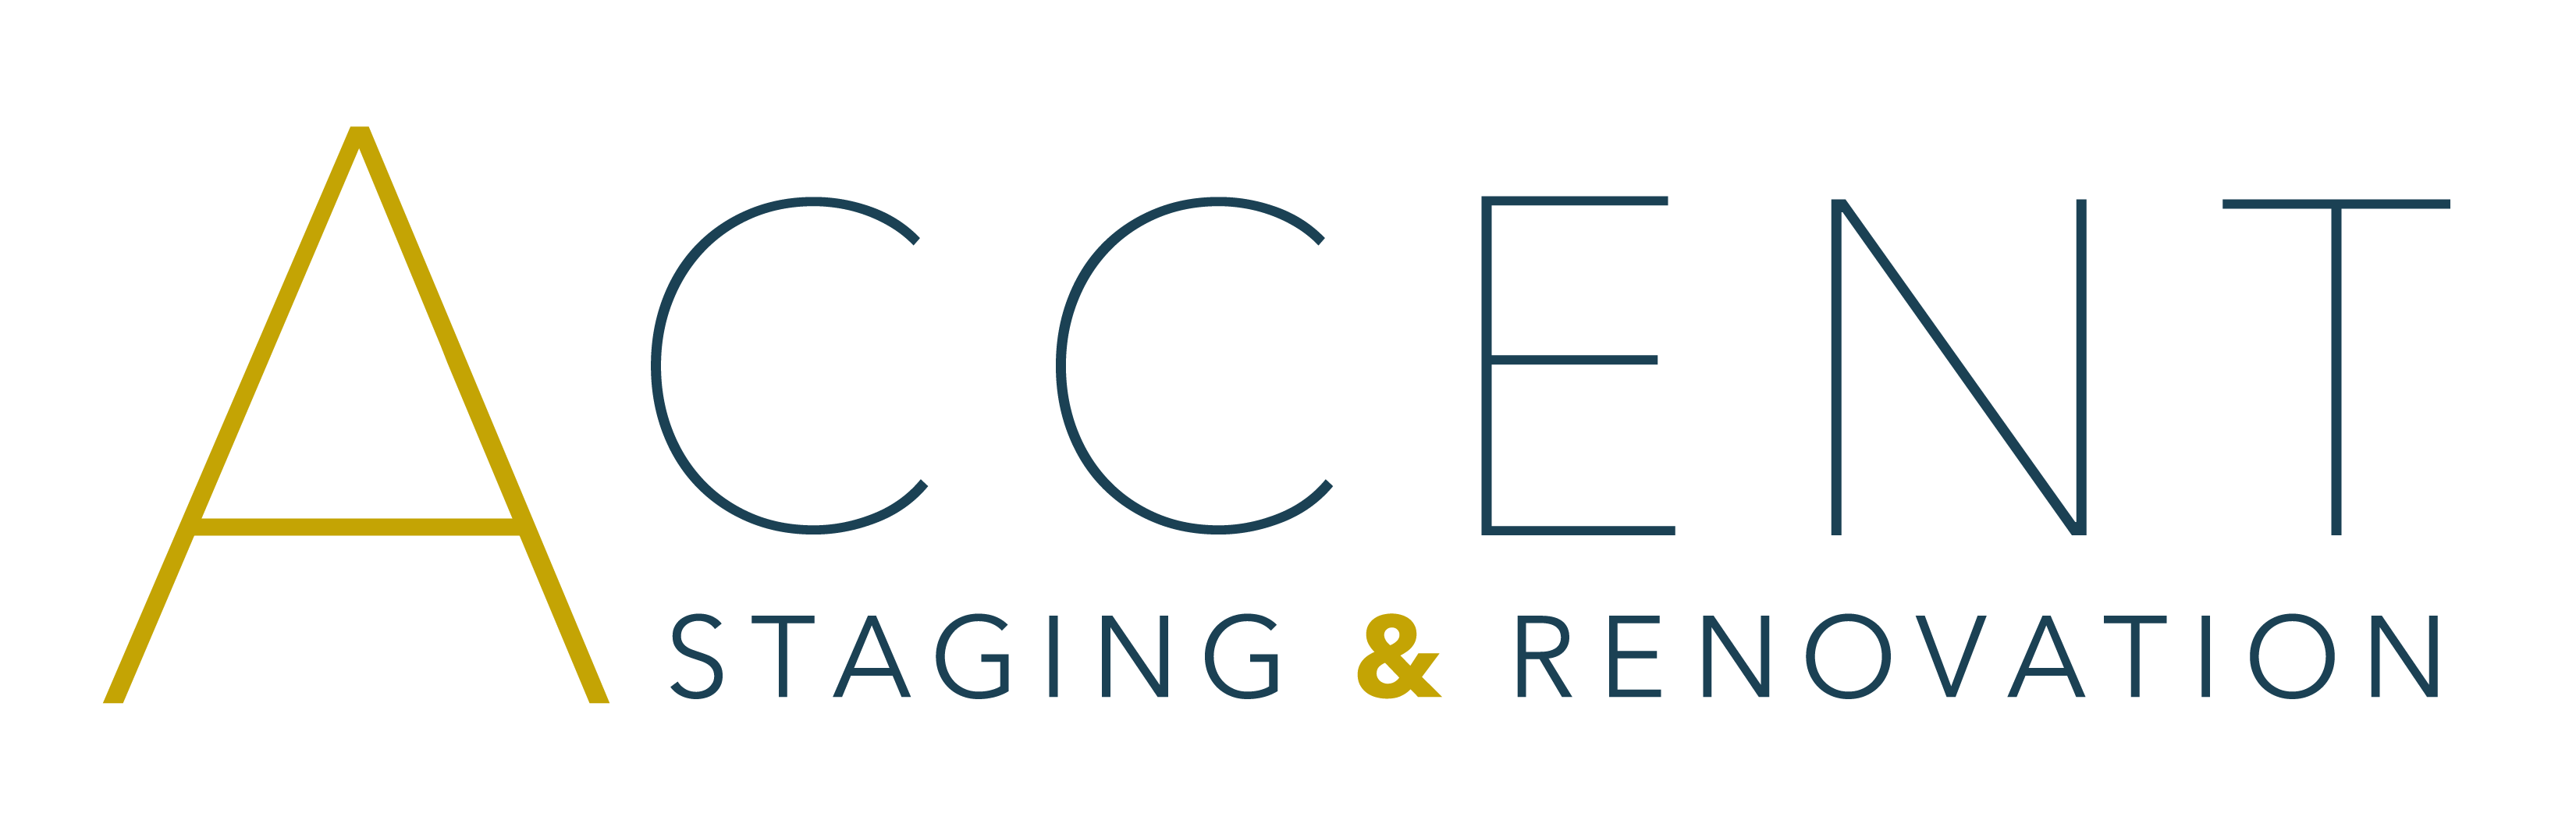 Accent Staging & Renovation Logo